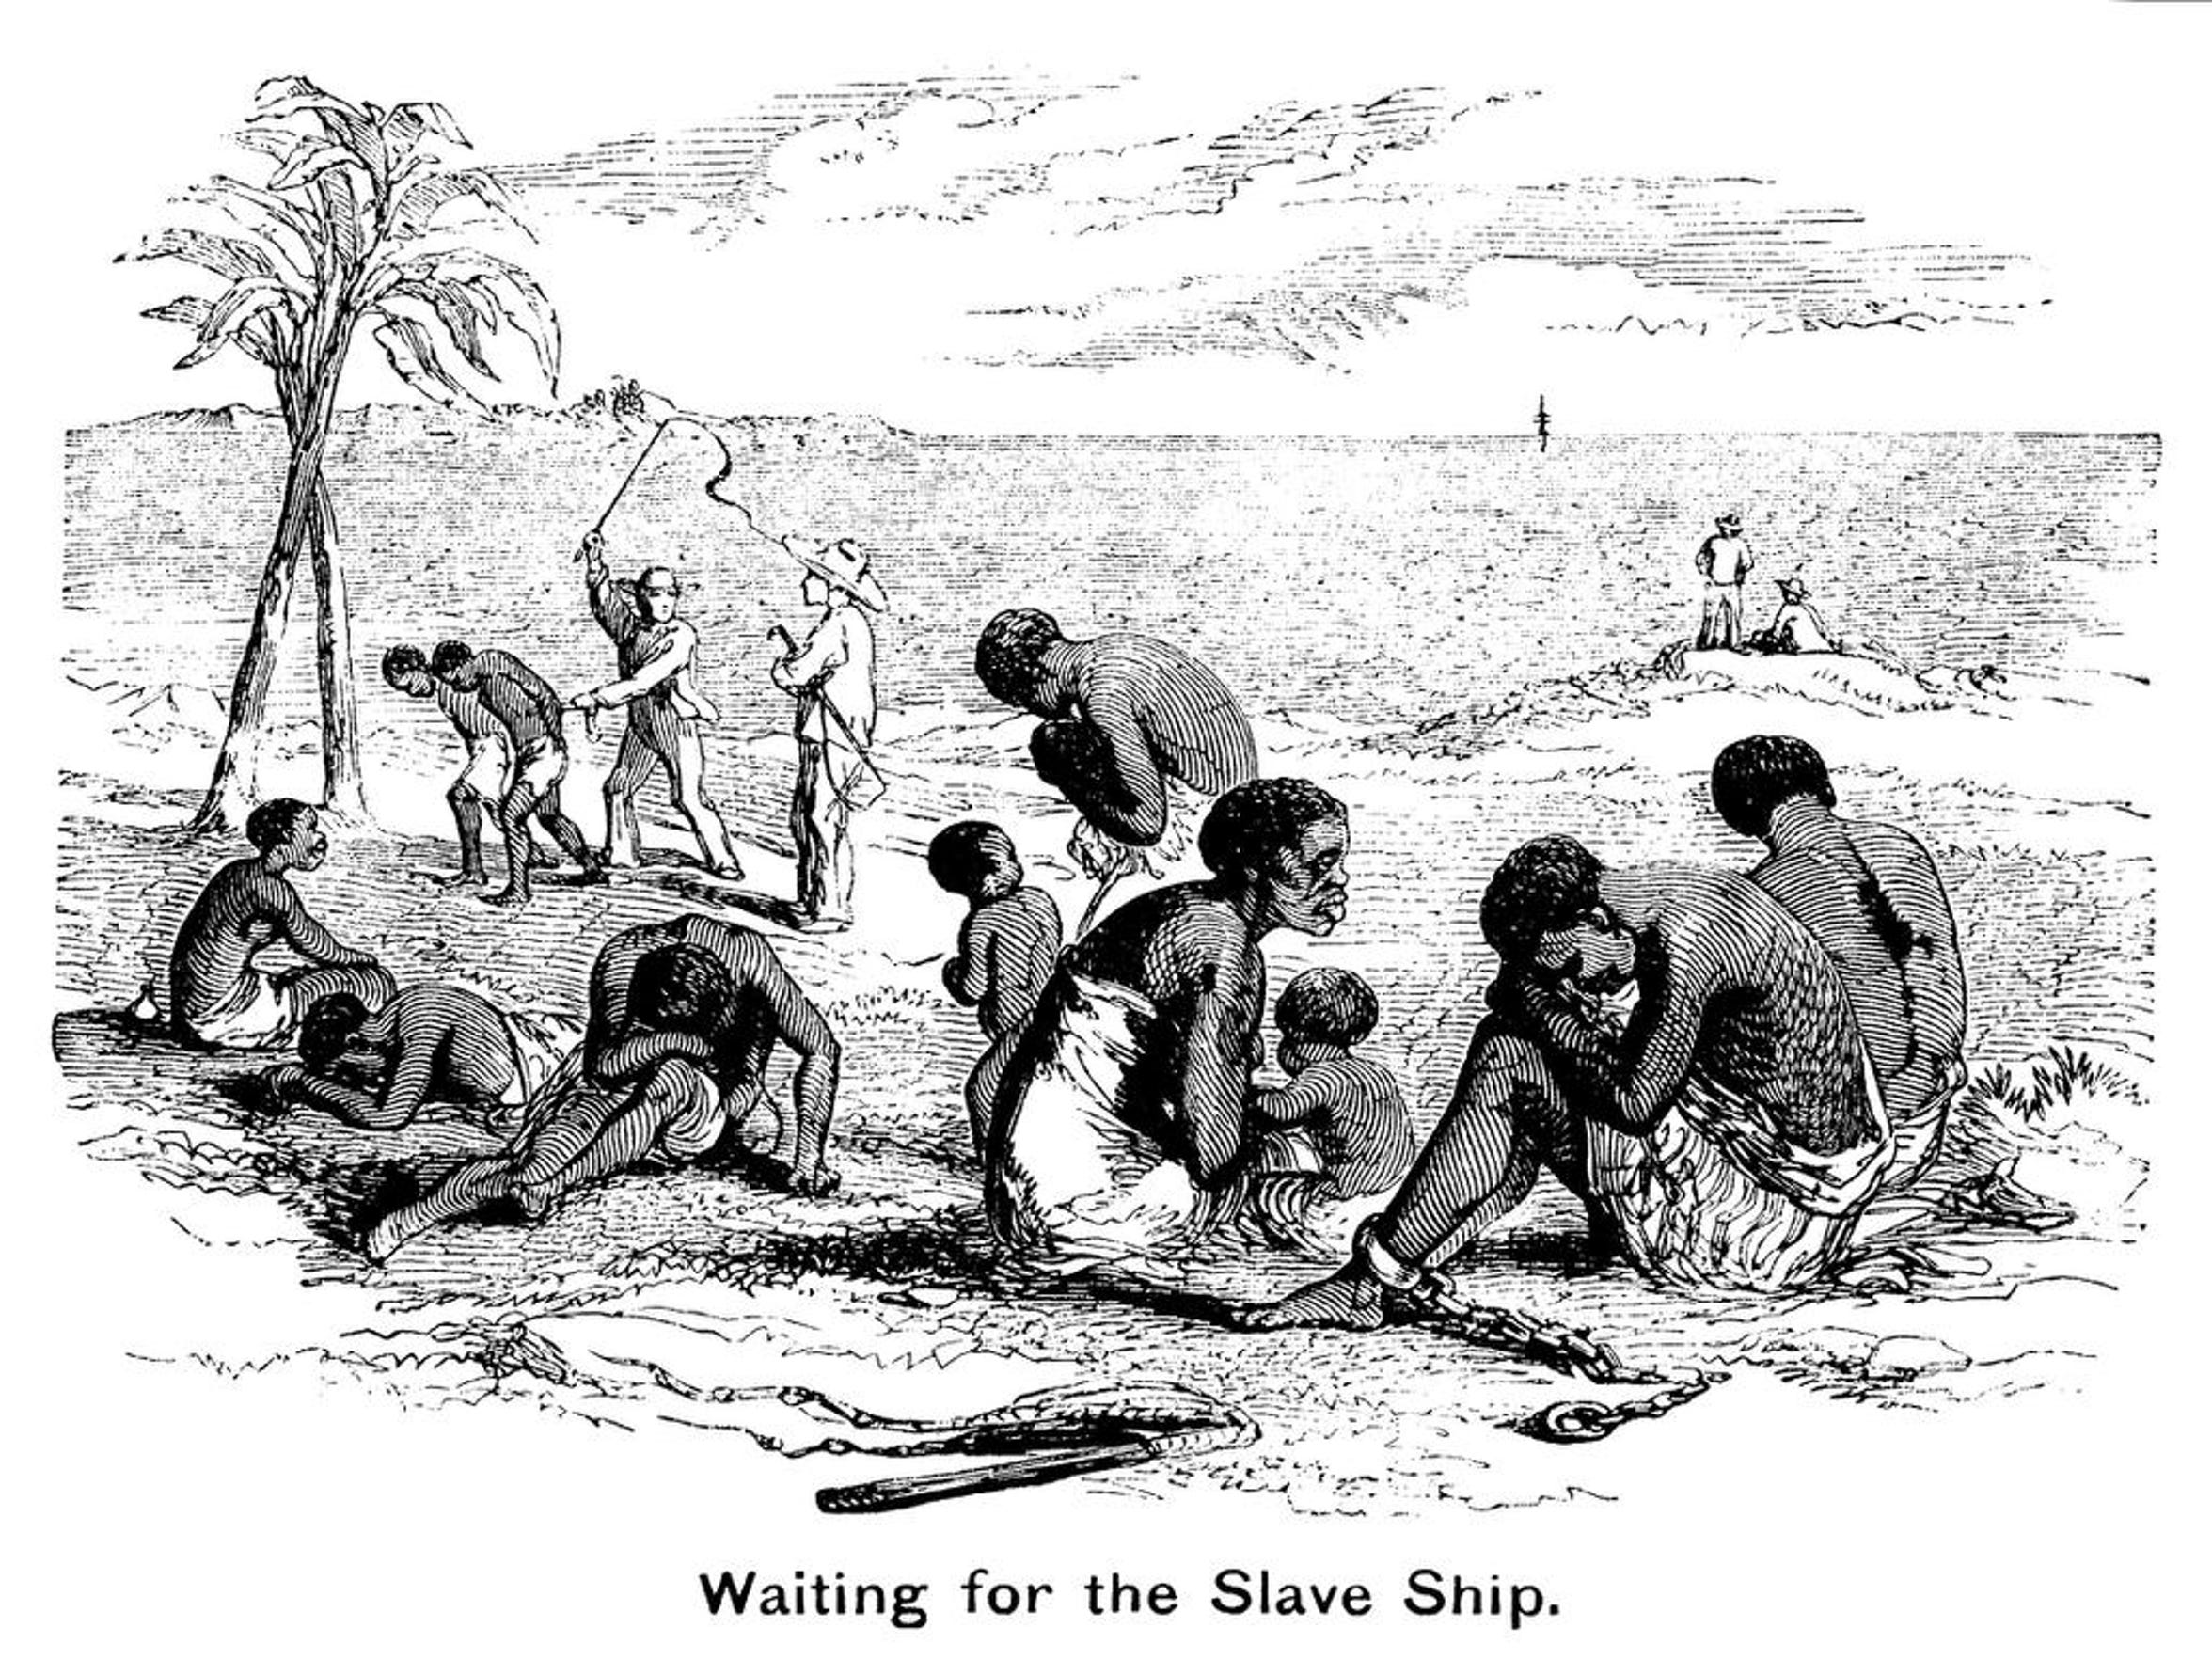 1619 In America 400 Years Ago Africans Arrived In Virginia